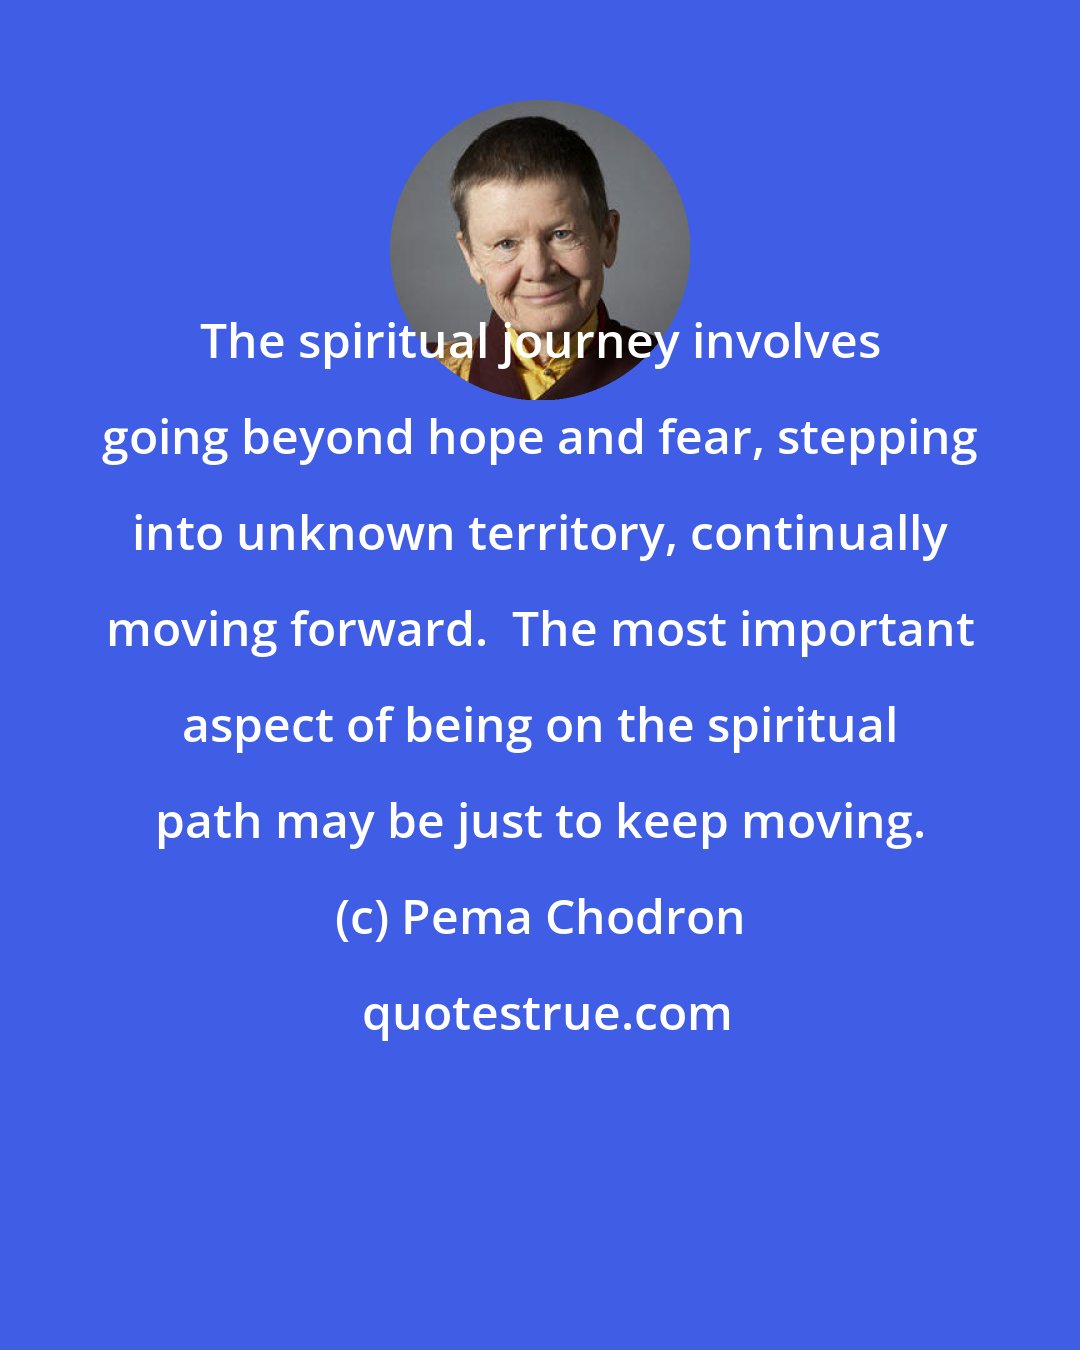 Pema Chodron: The spiritual journey involves going beyond hope and fear, stepping into unknown territory, continually moving forward.  The most important aspect of being on the spiritual path may be just to keep moving.